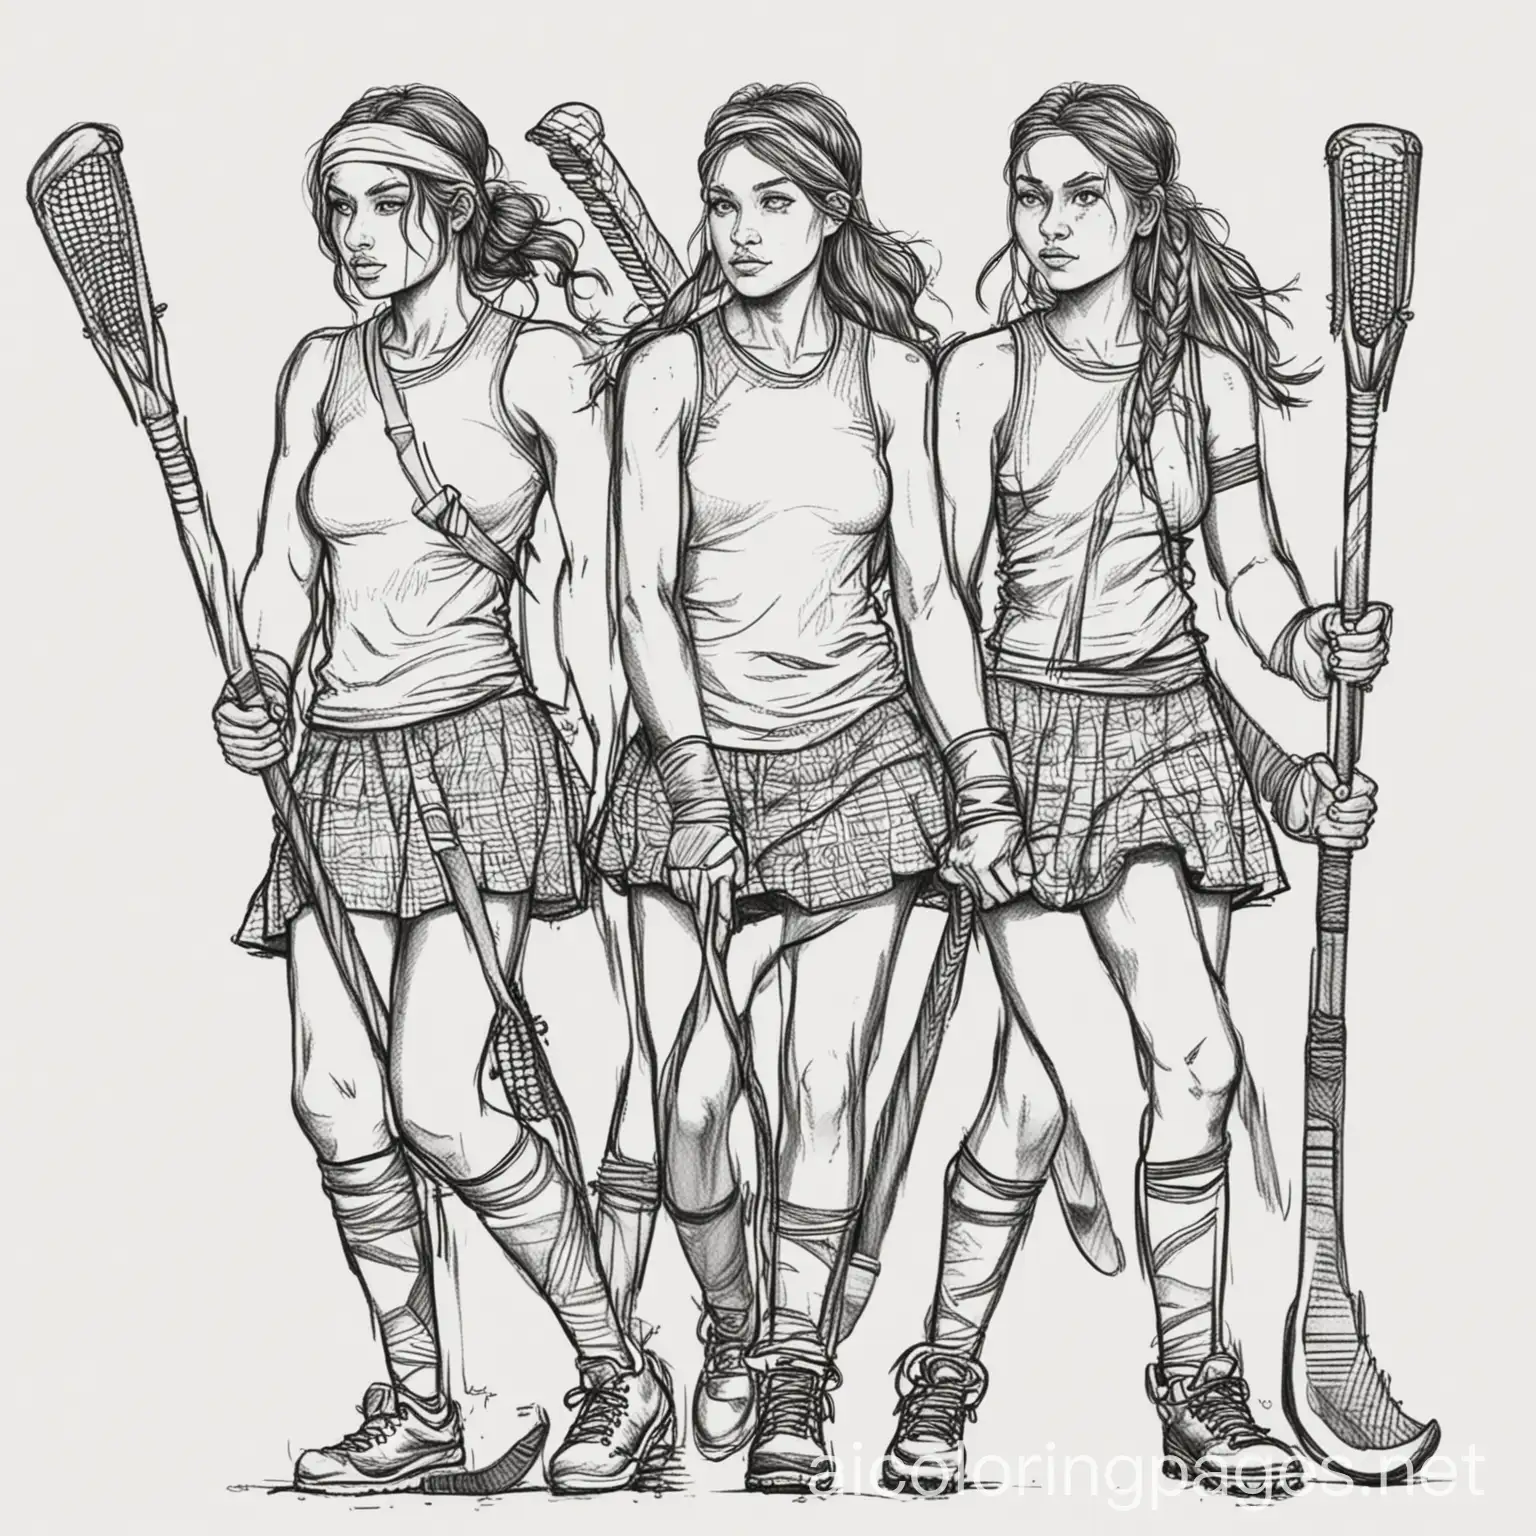 Tribu de Mujeres Luchadoras con Palos de Hockey sobre Césped, Coloring Page, black and white, line art, white background, Simplicity, Ample White Space. The background of the coloring page is plain white to make it easy for young children to color within the lines. The outlines of all the subjects are easy to distinguish, making it simple for kids to color without too much difficulty